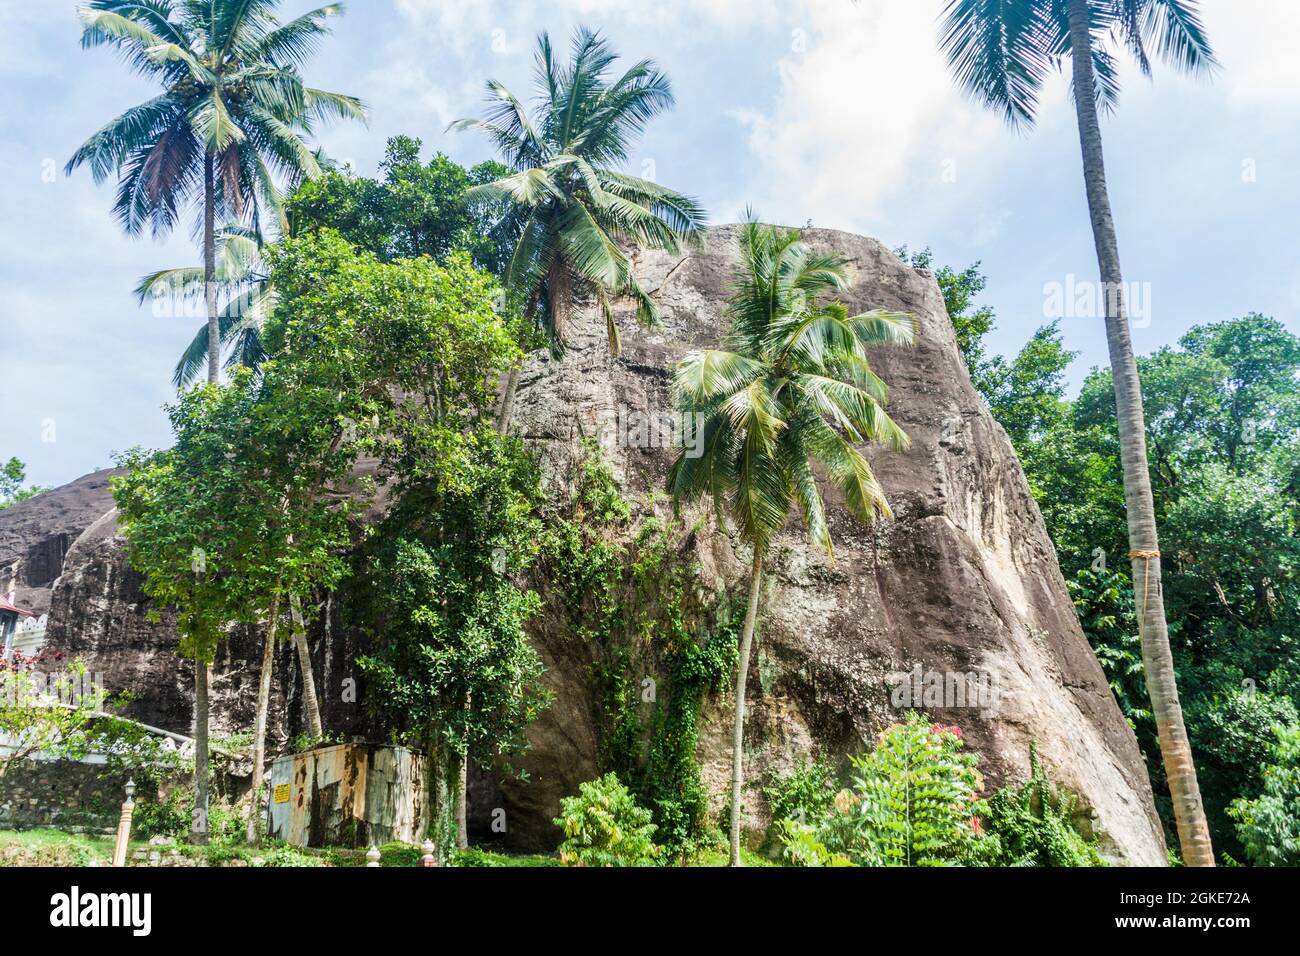 Outer view of Aluvihare Rock Temple, Sri Lanka Stock Photo